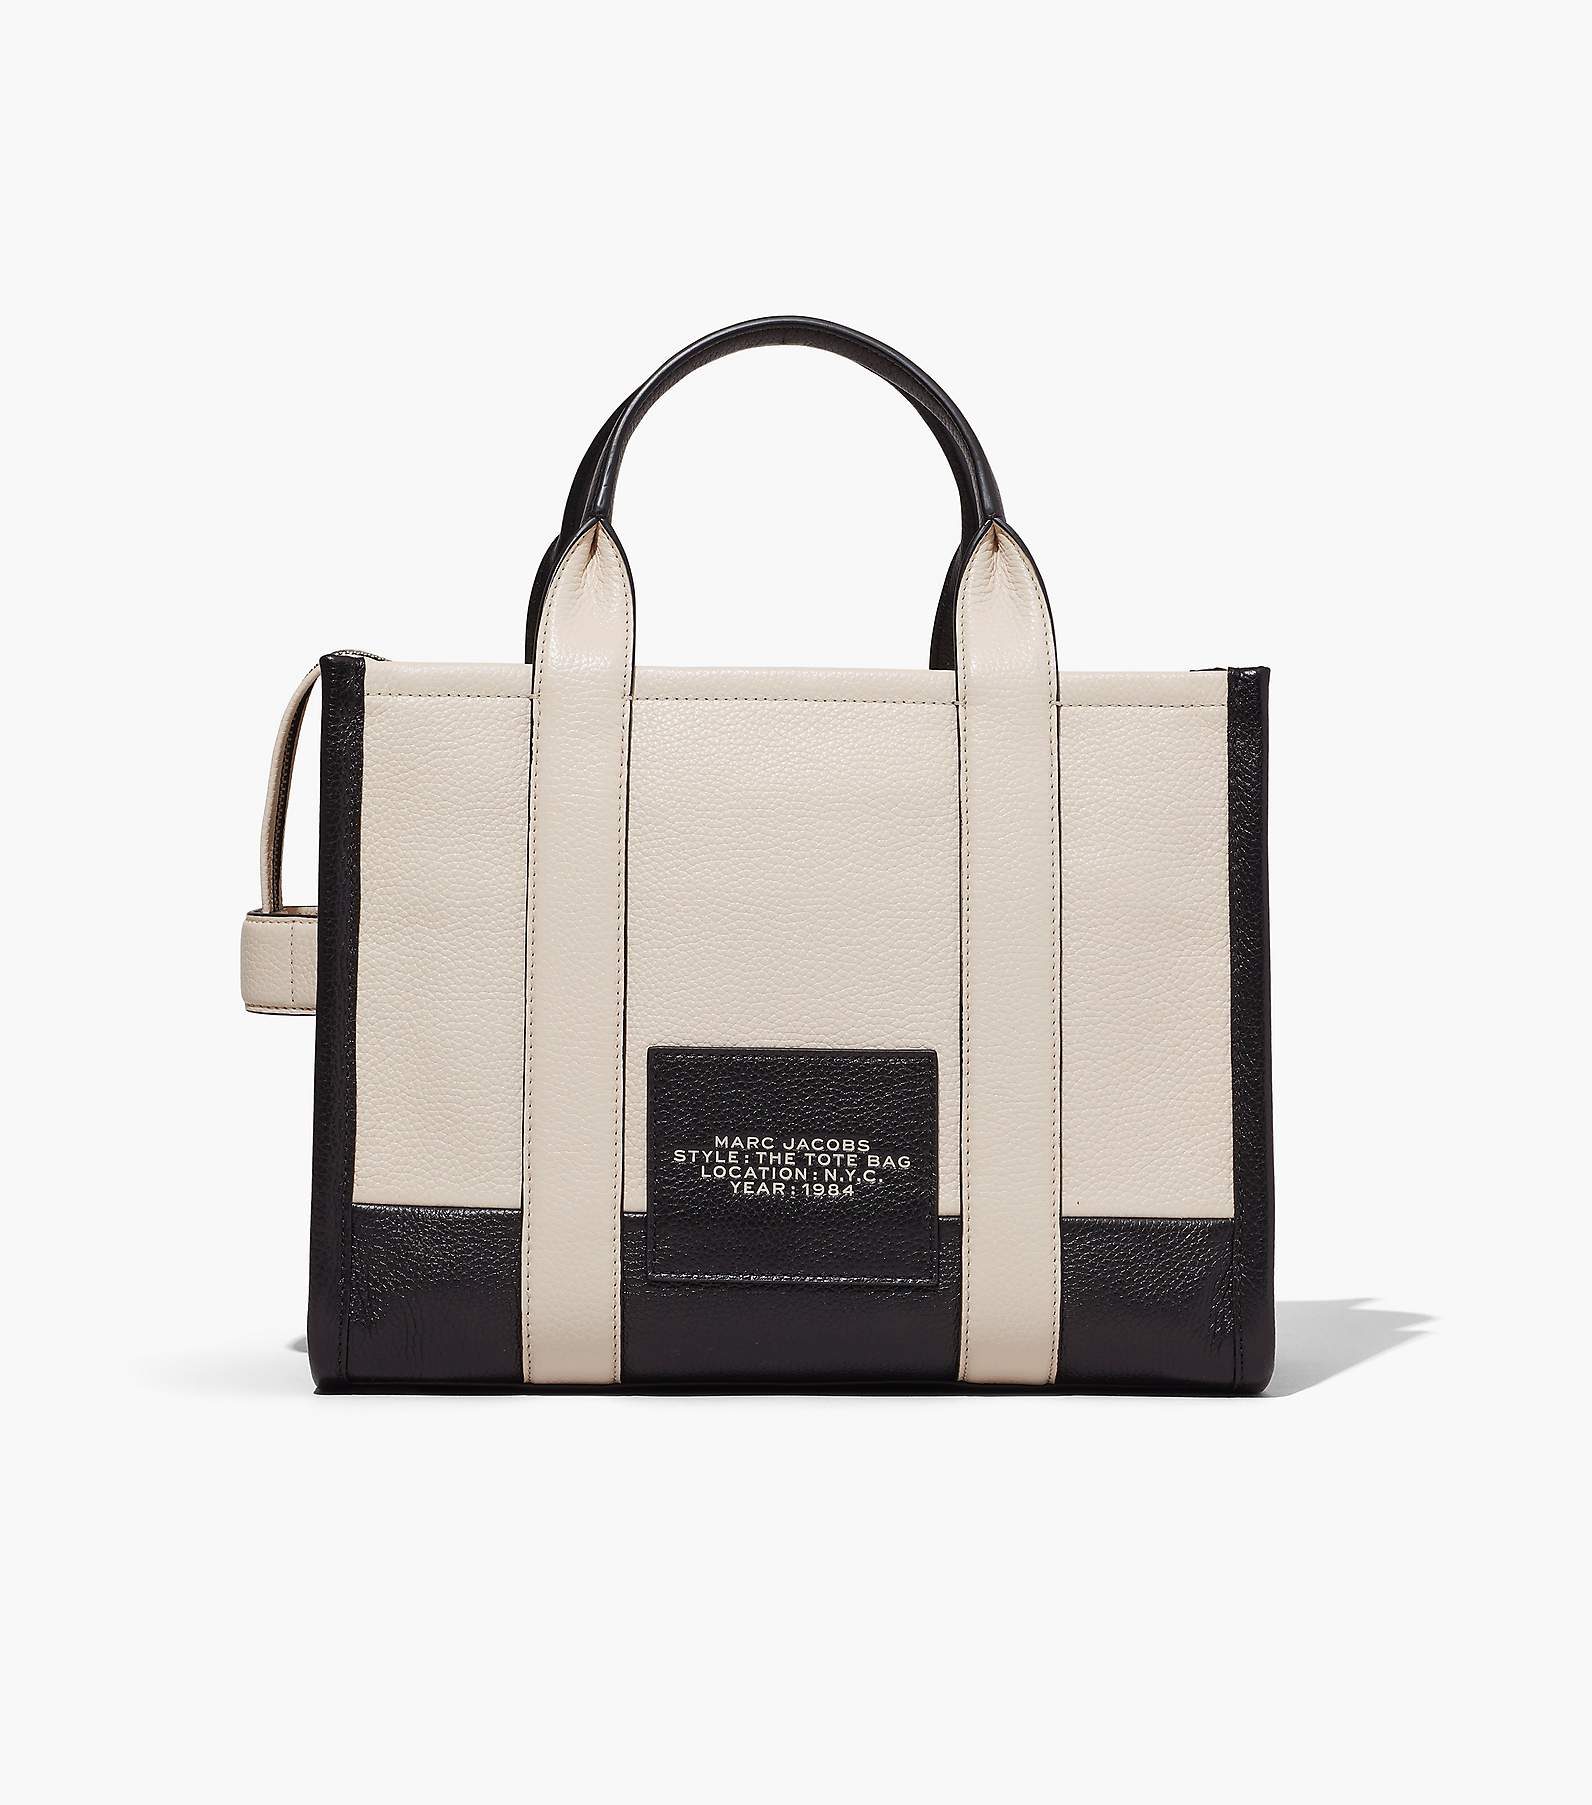 Marc Jacobs: Black & Off-White 'The Colorblock Small' Tote